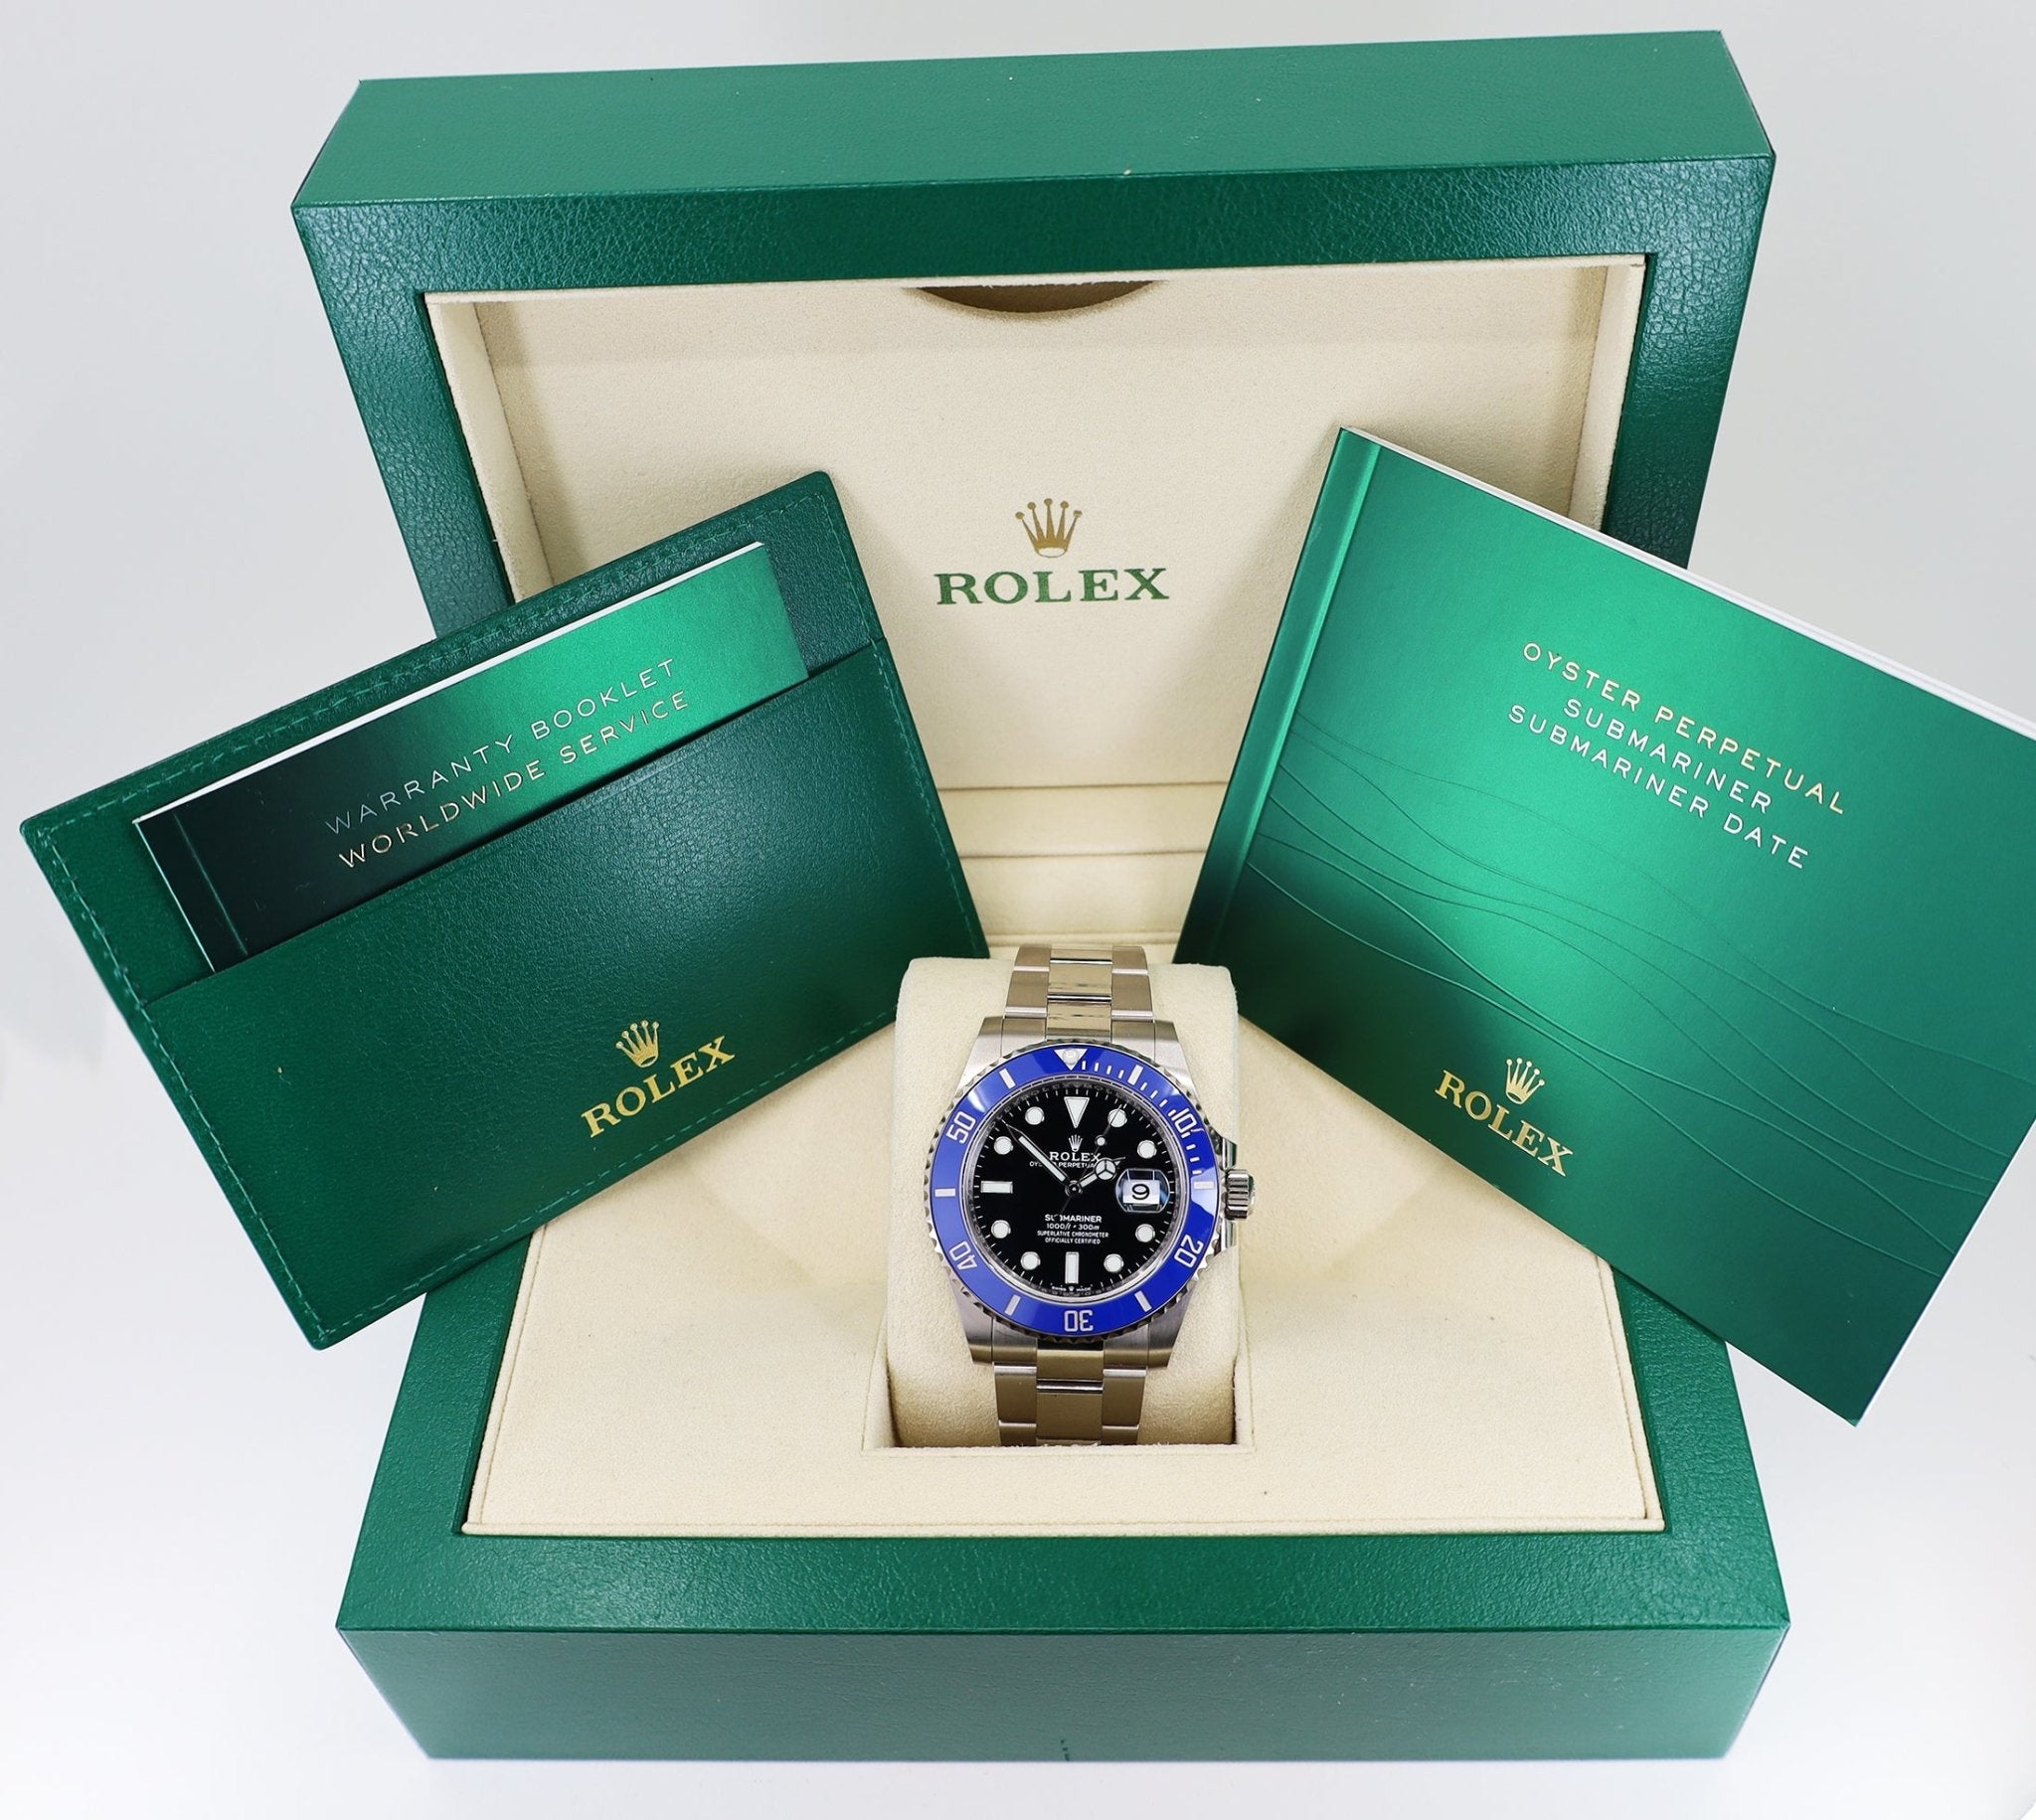 All Black Dial & Yellow Gold Rolex Submariner Watches